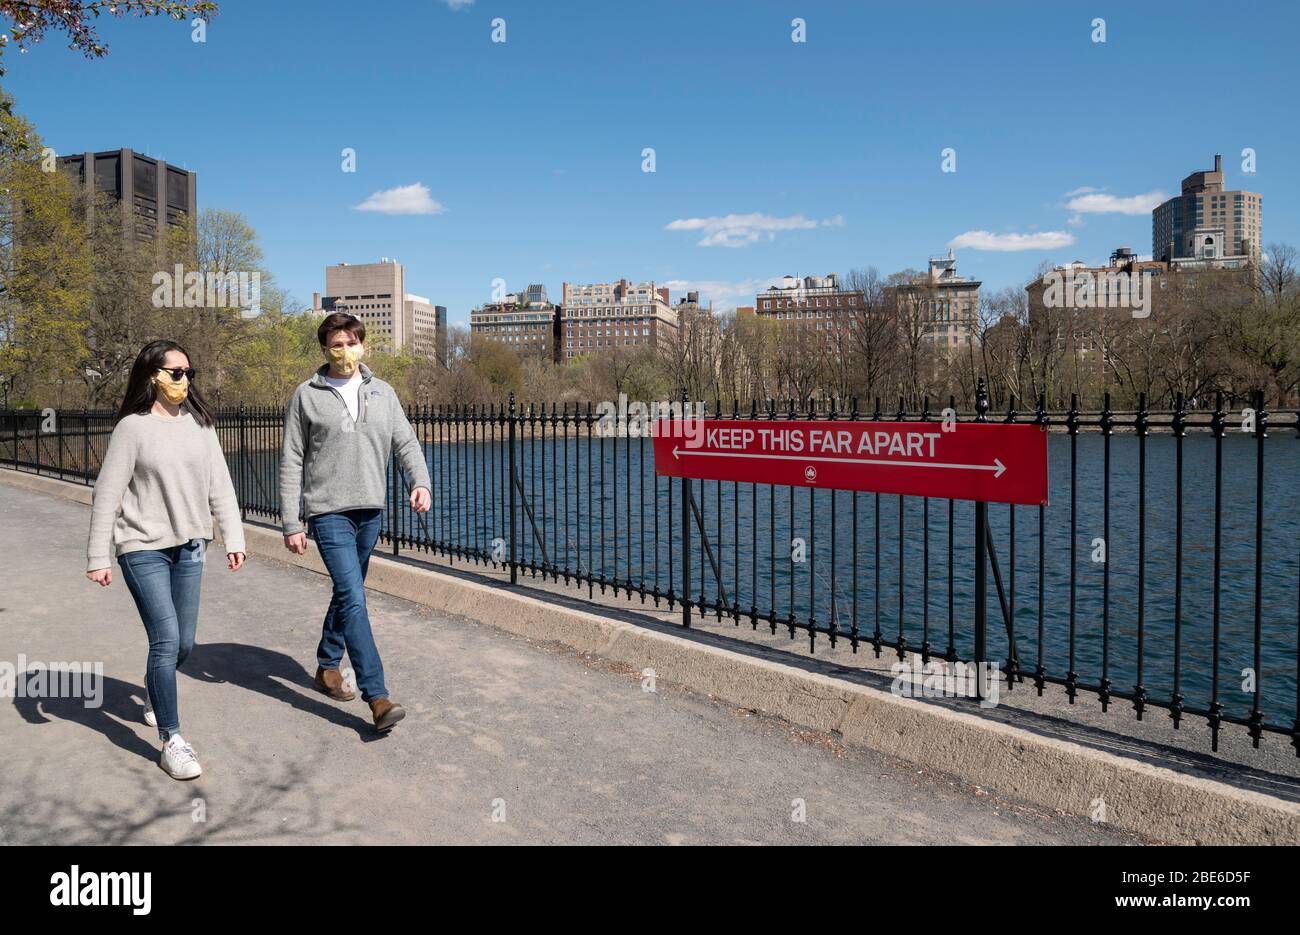 New York, NY, USA. April 11, 2020. A couple in protective masks walks by a social distancing sign on the running track at the reservoir in Central Par Stock Photo